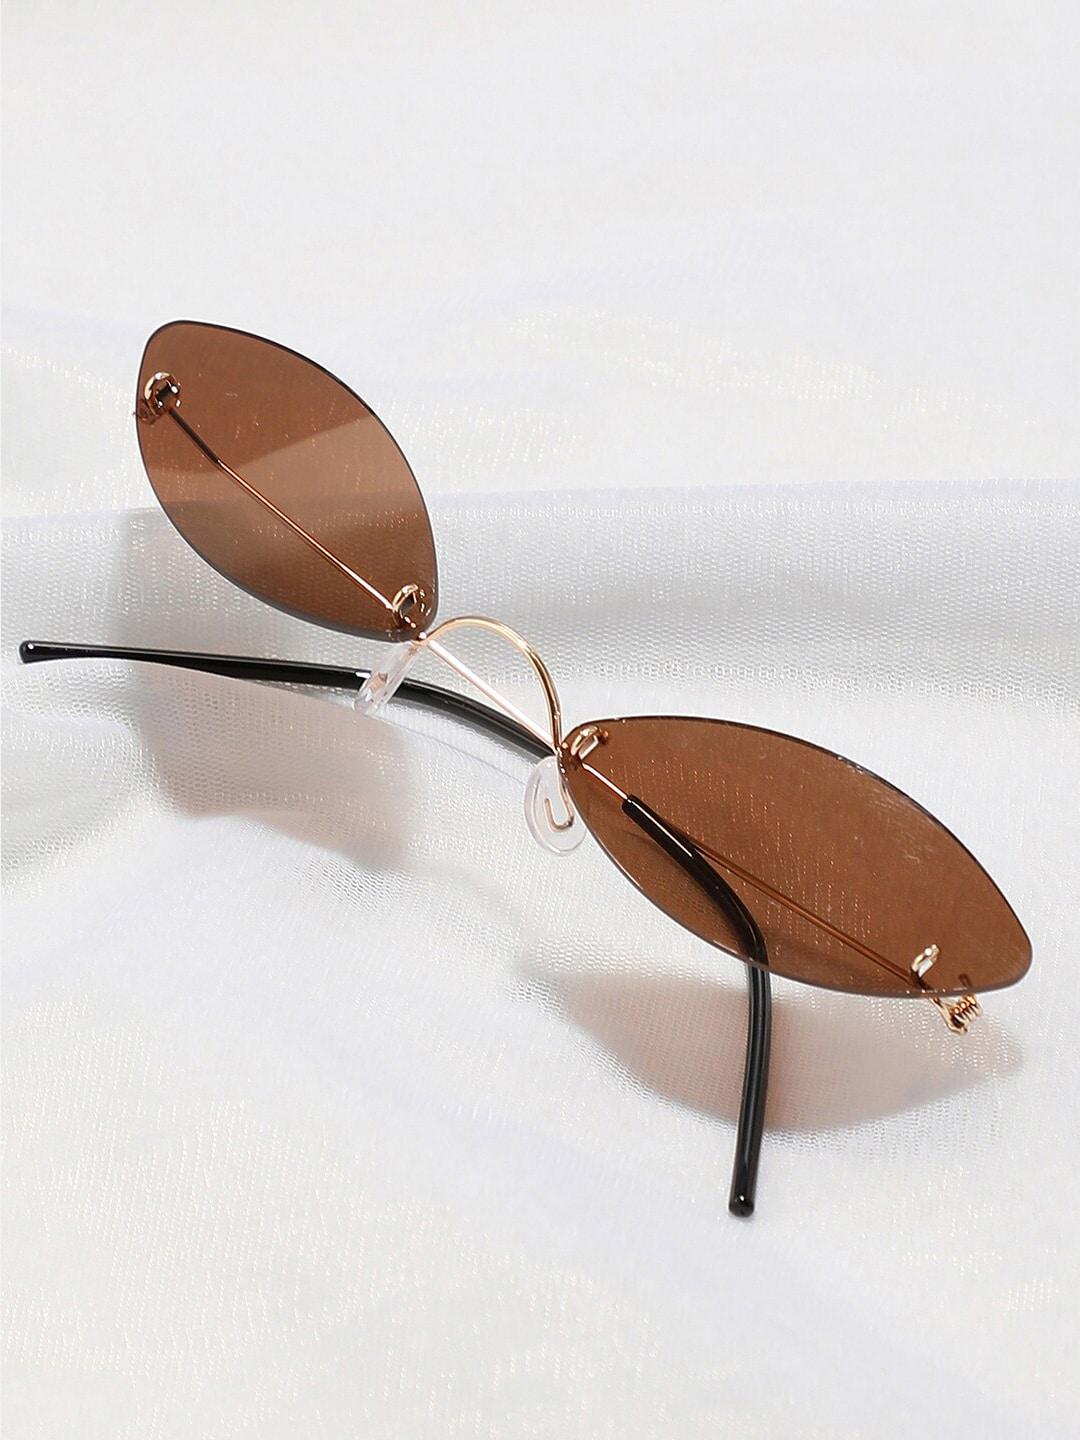 HAUTE SAUCE by Campus Sutra Unisex Brown Lens & Gold-Toned Other Sunglasses with Polarised Lens